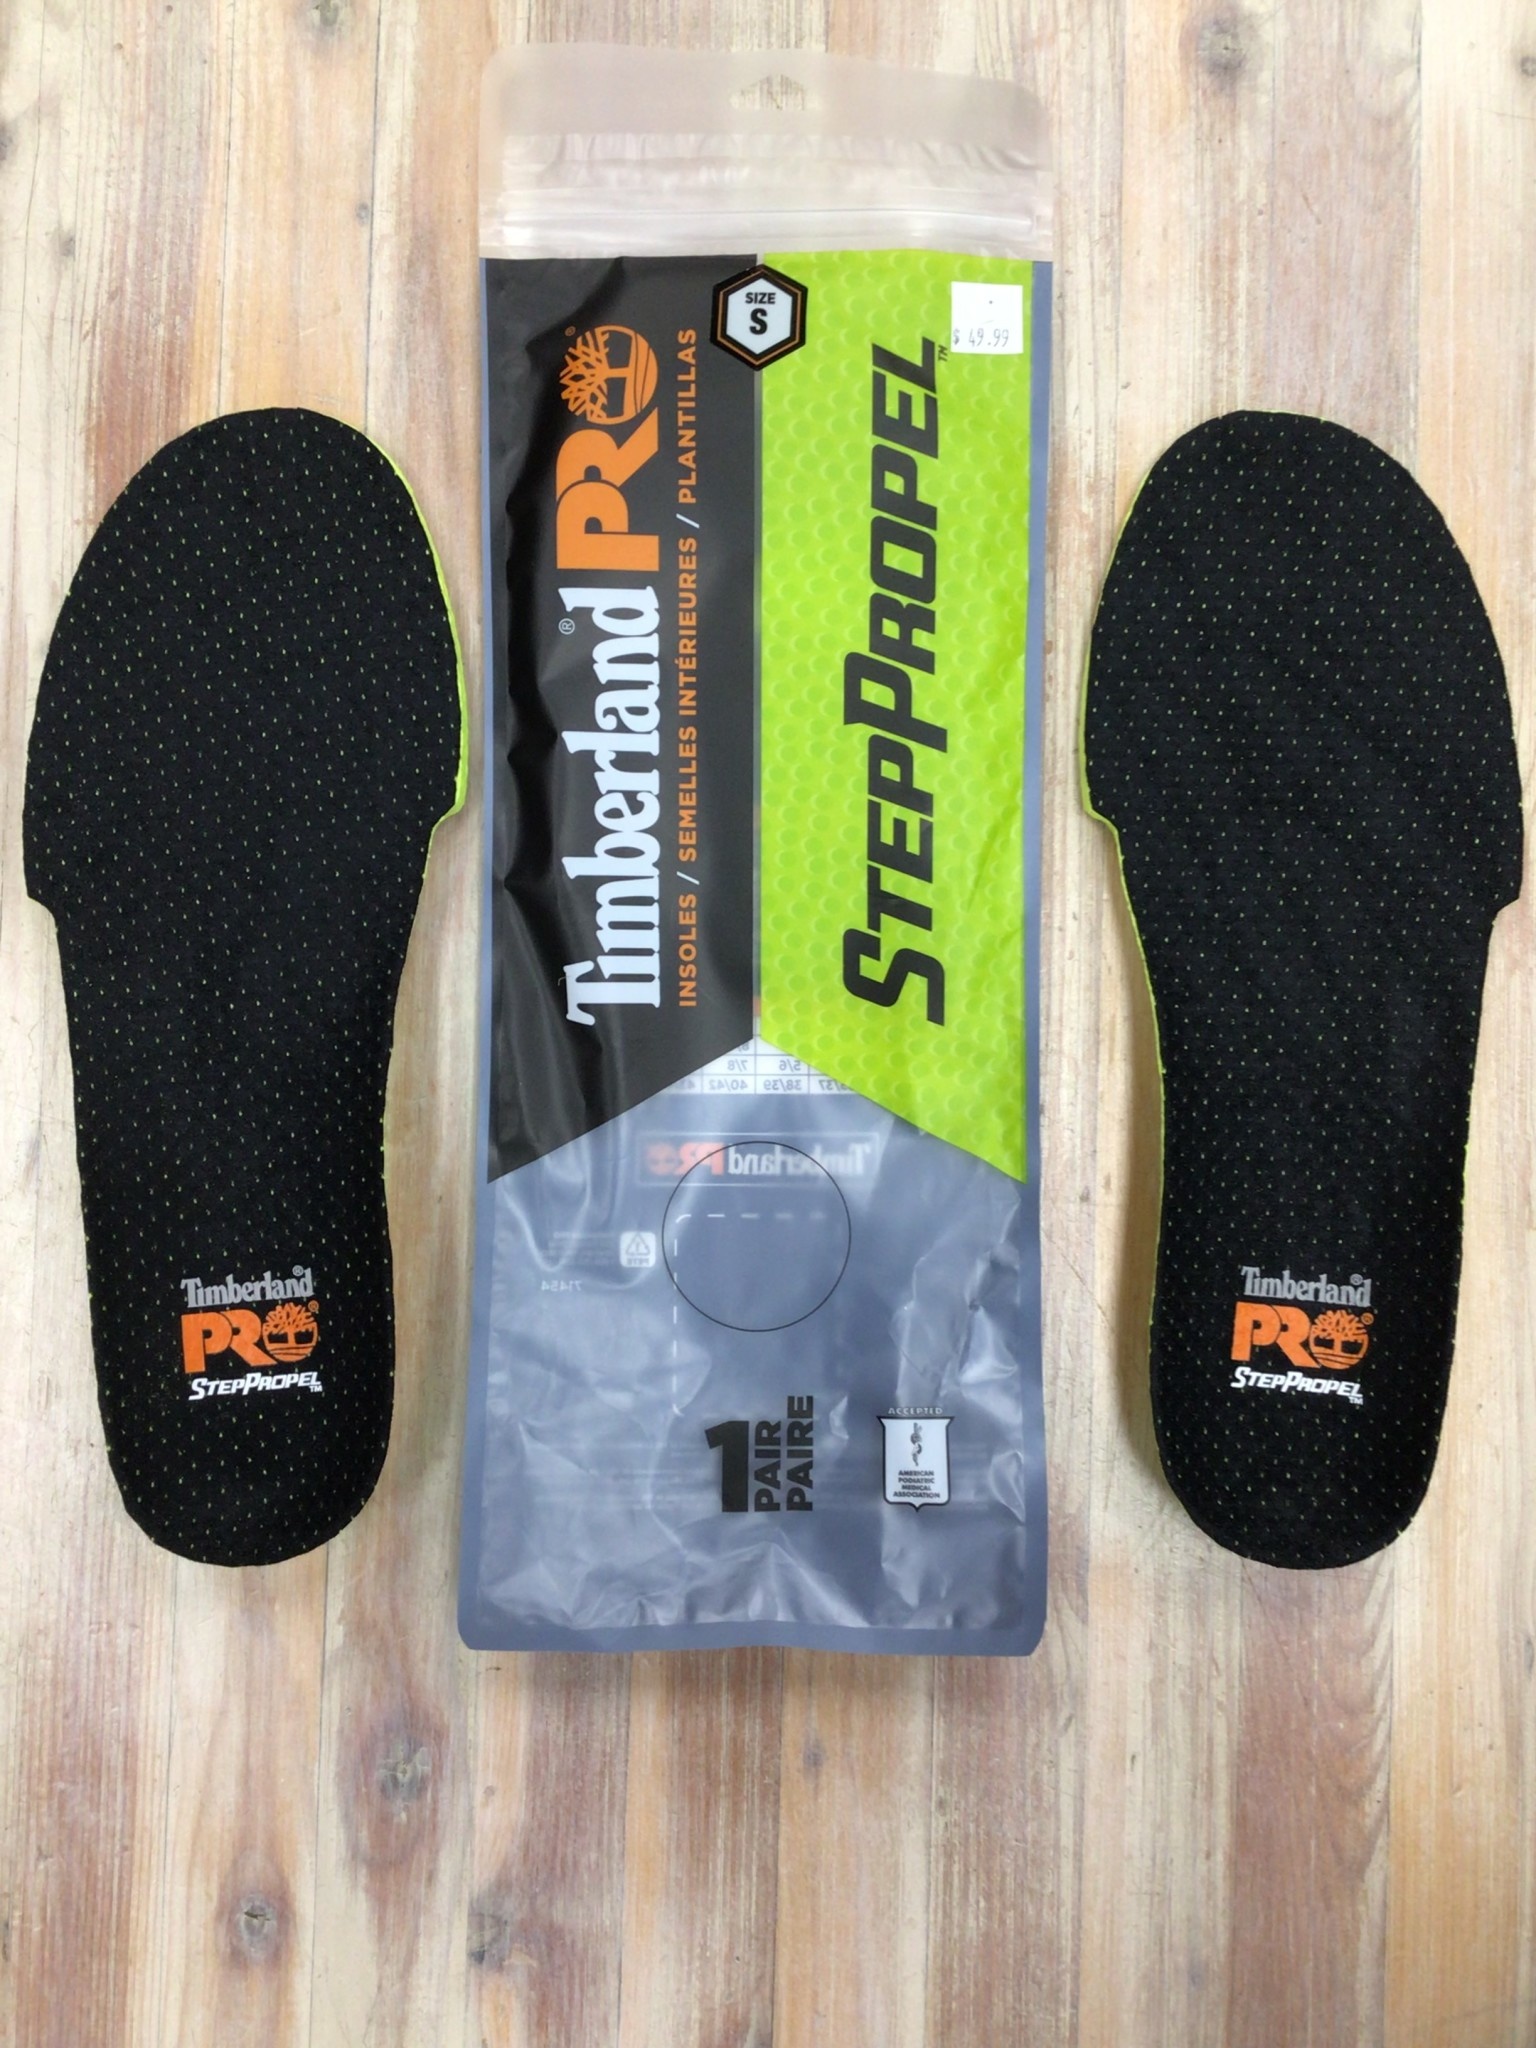 Timberland Pro Step Propel Footbed Insoles Unisex - Shoes & M'Orr